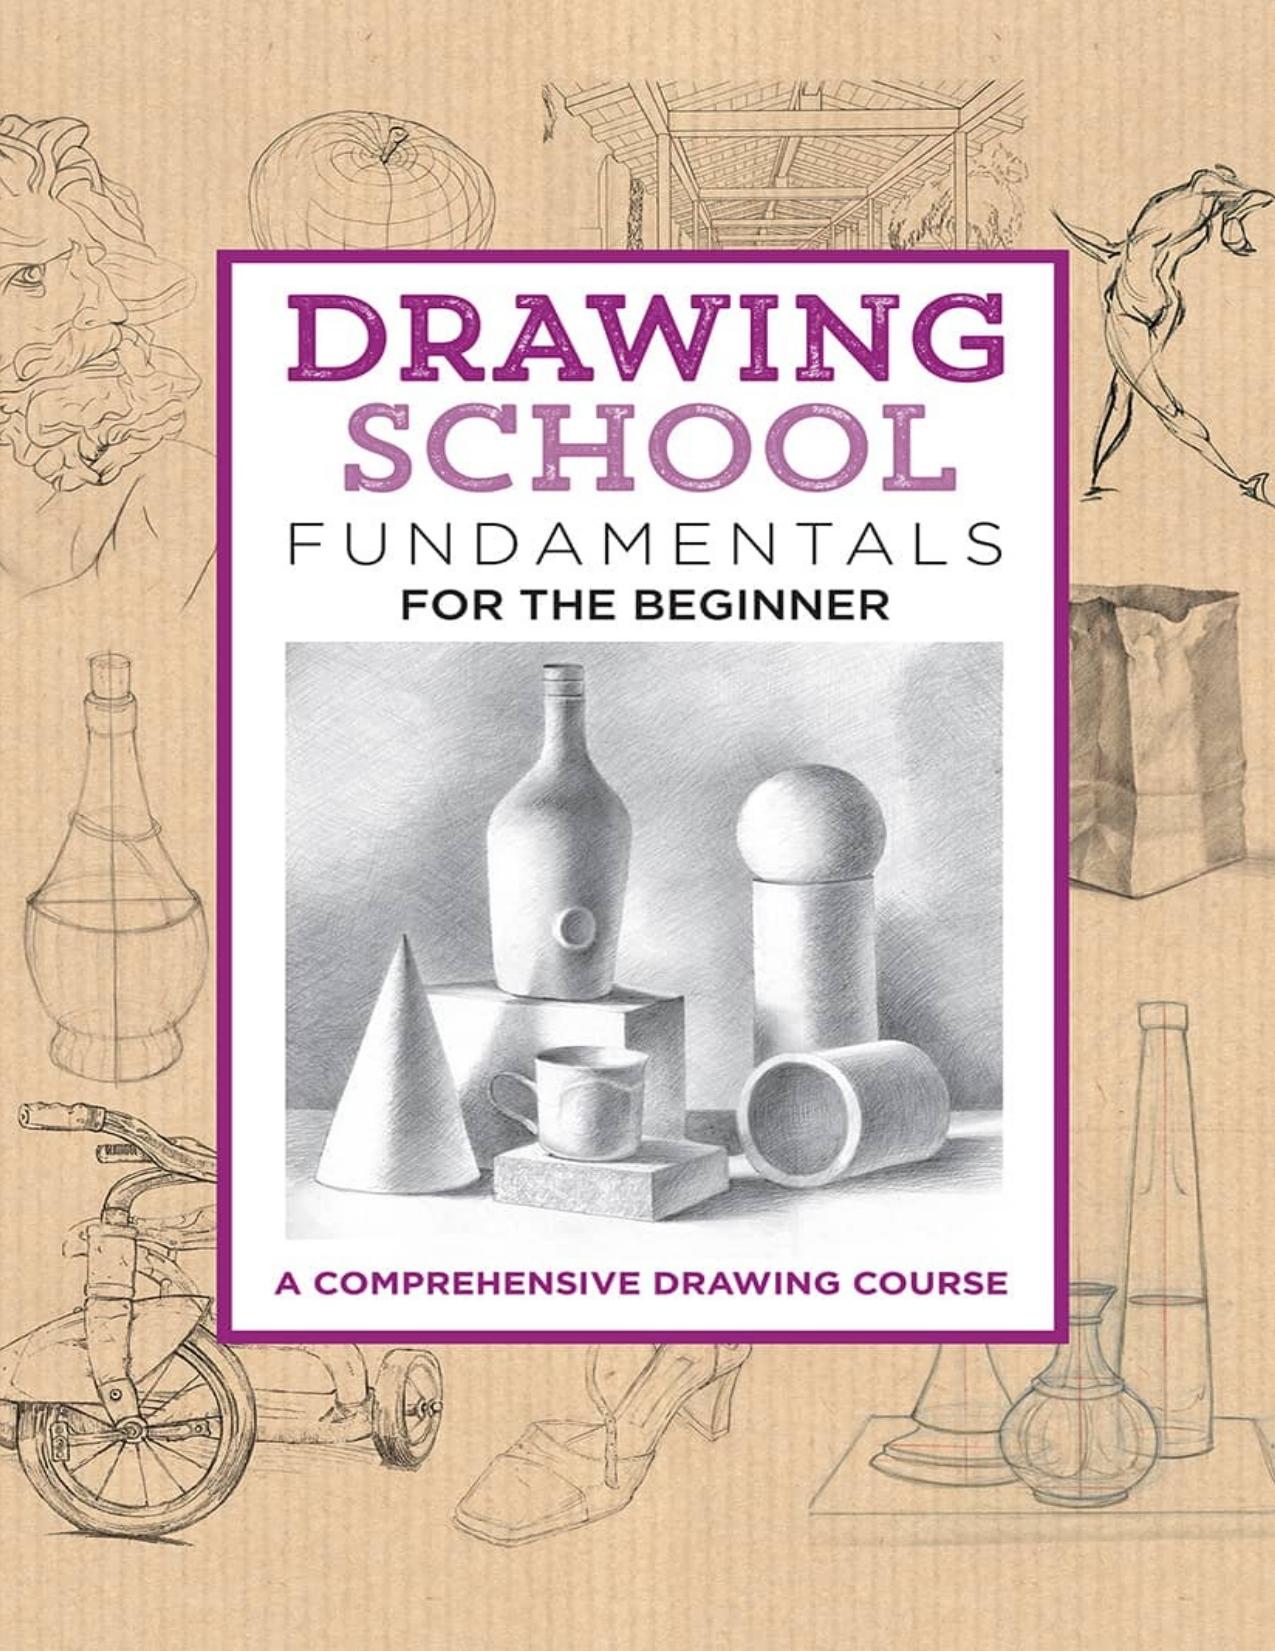 Drawing School: Fundamentals for the Beginner: A Comprehensive Drawing Course - PDFDrive.com